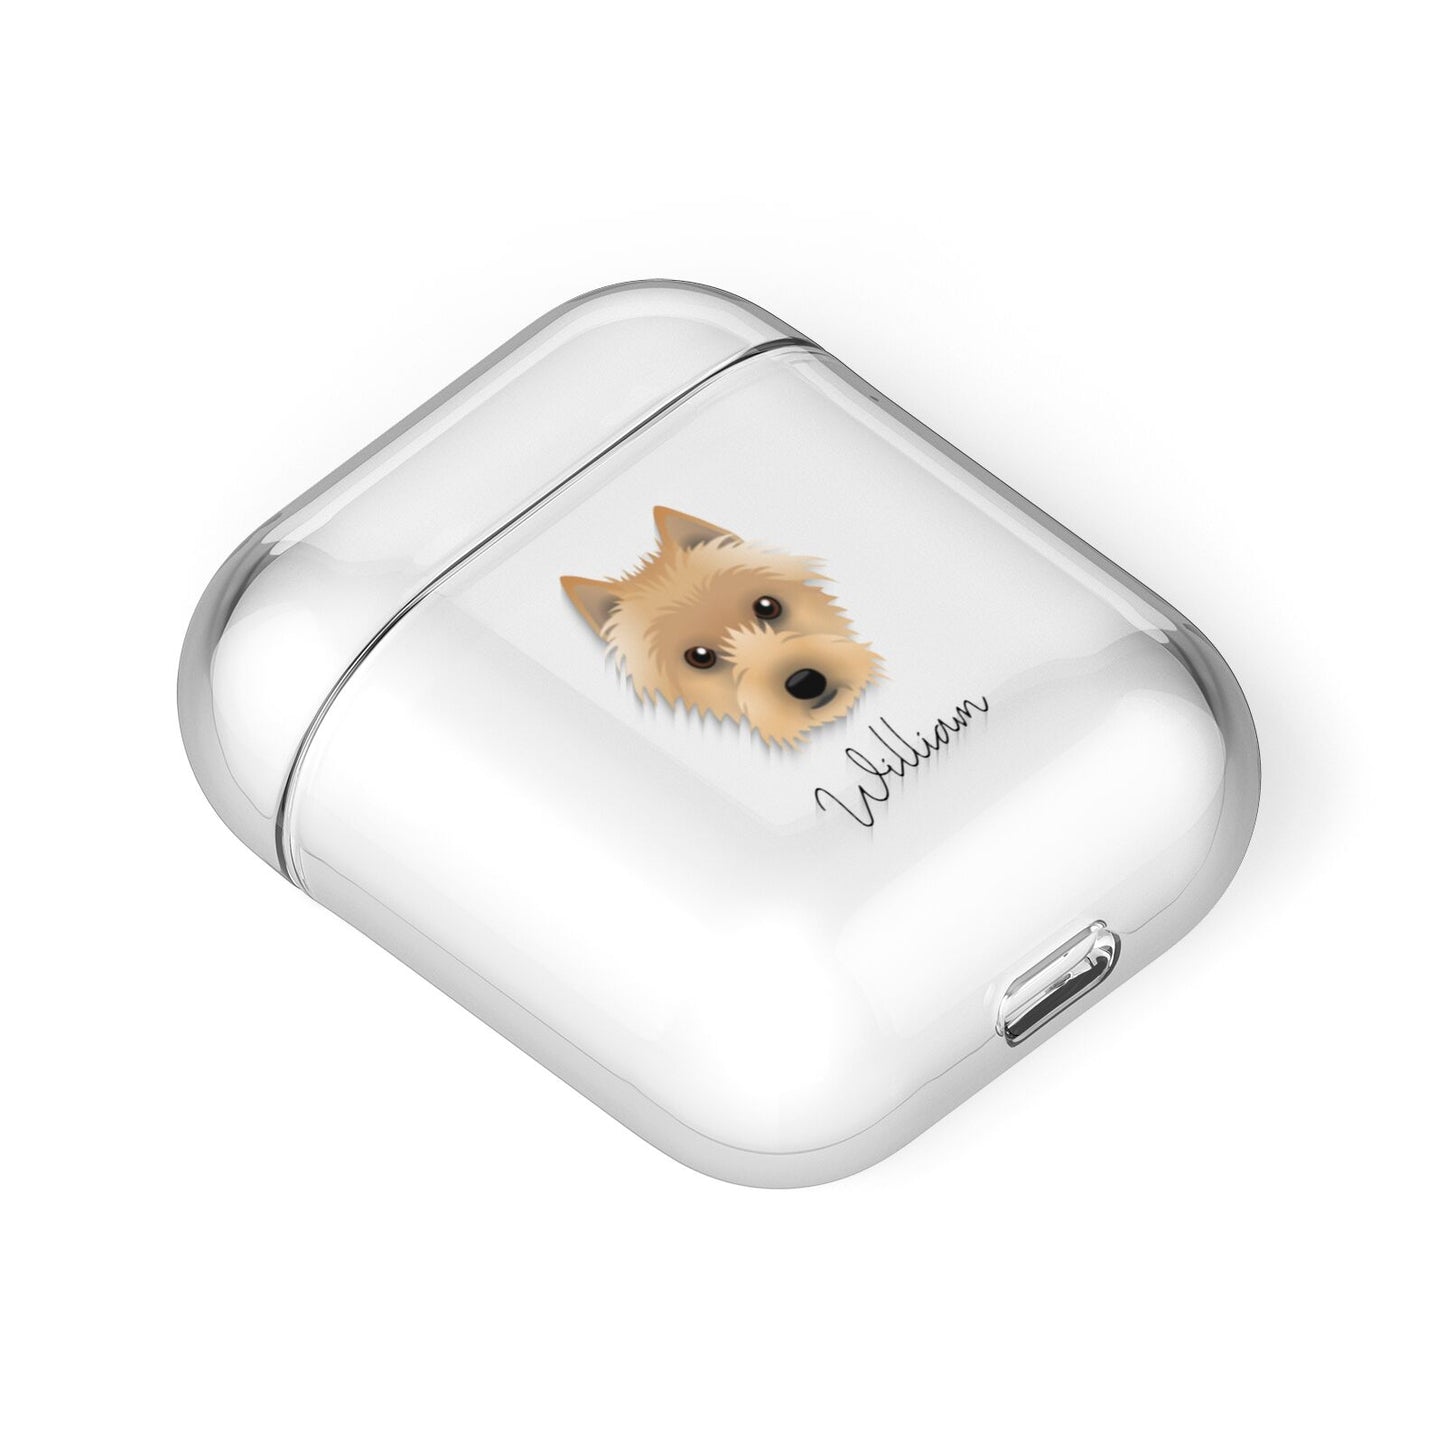 Australian Terrier Personalised AirPods Case Laid Flat